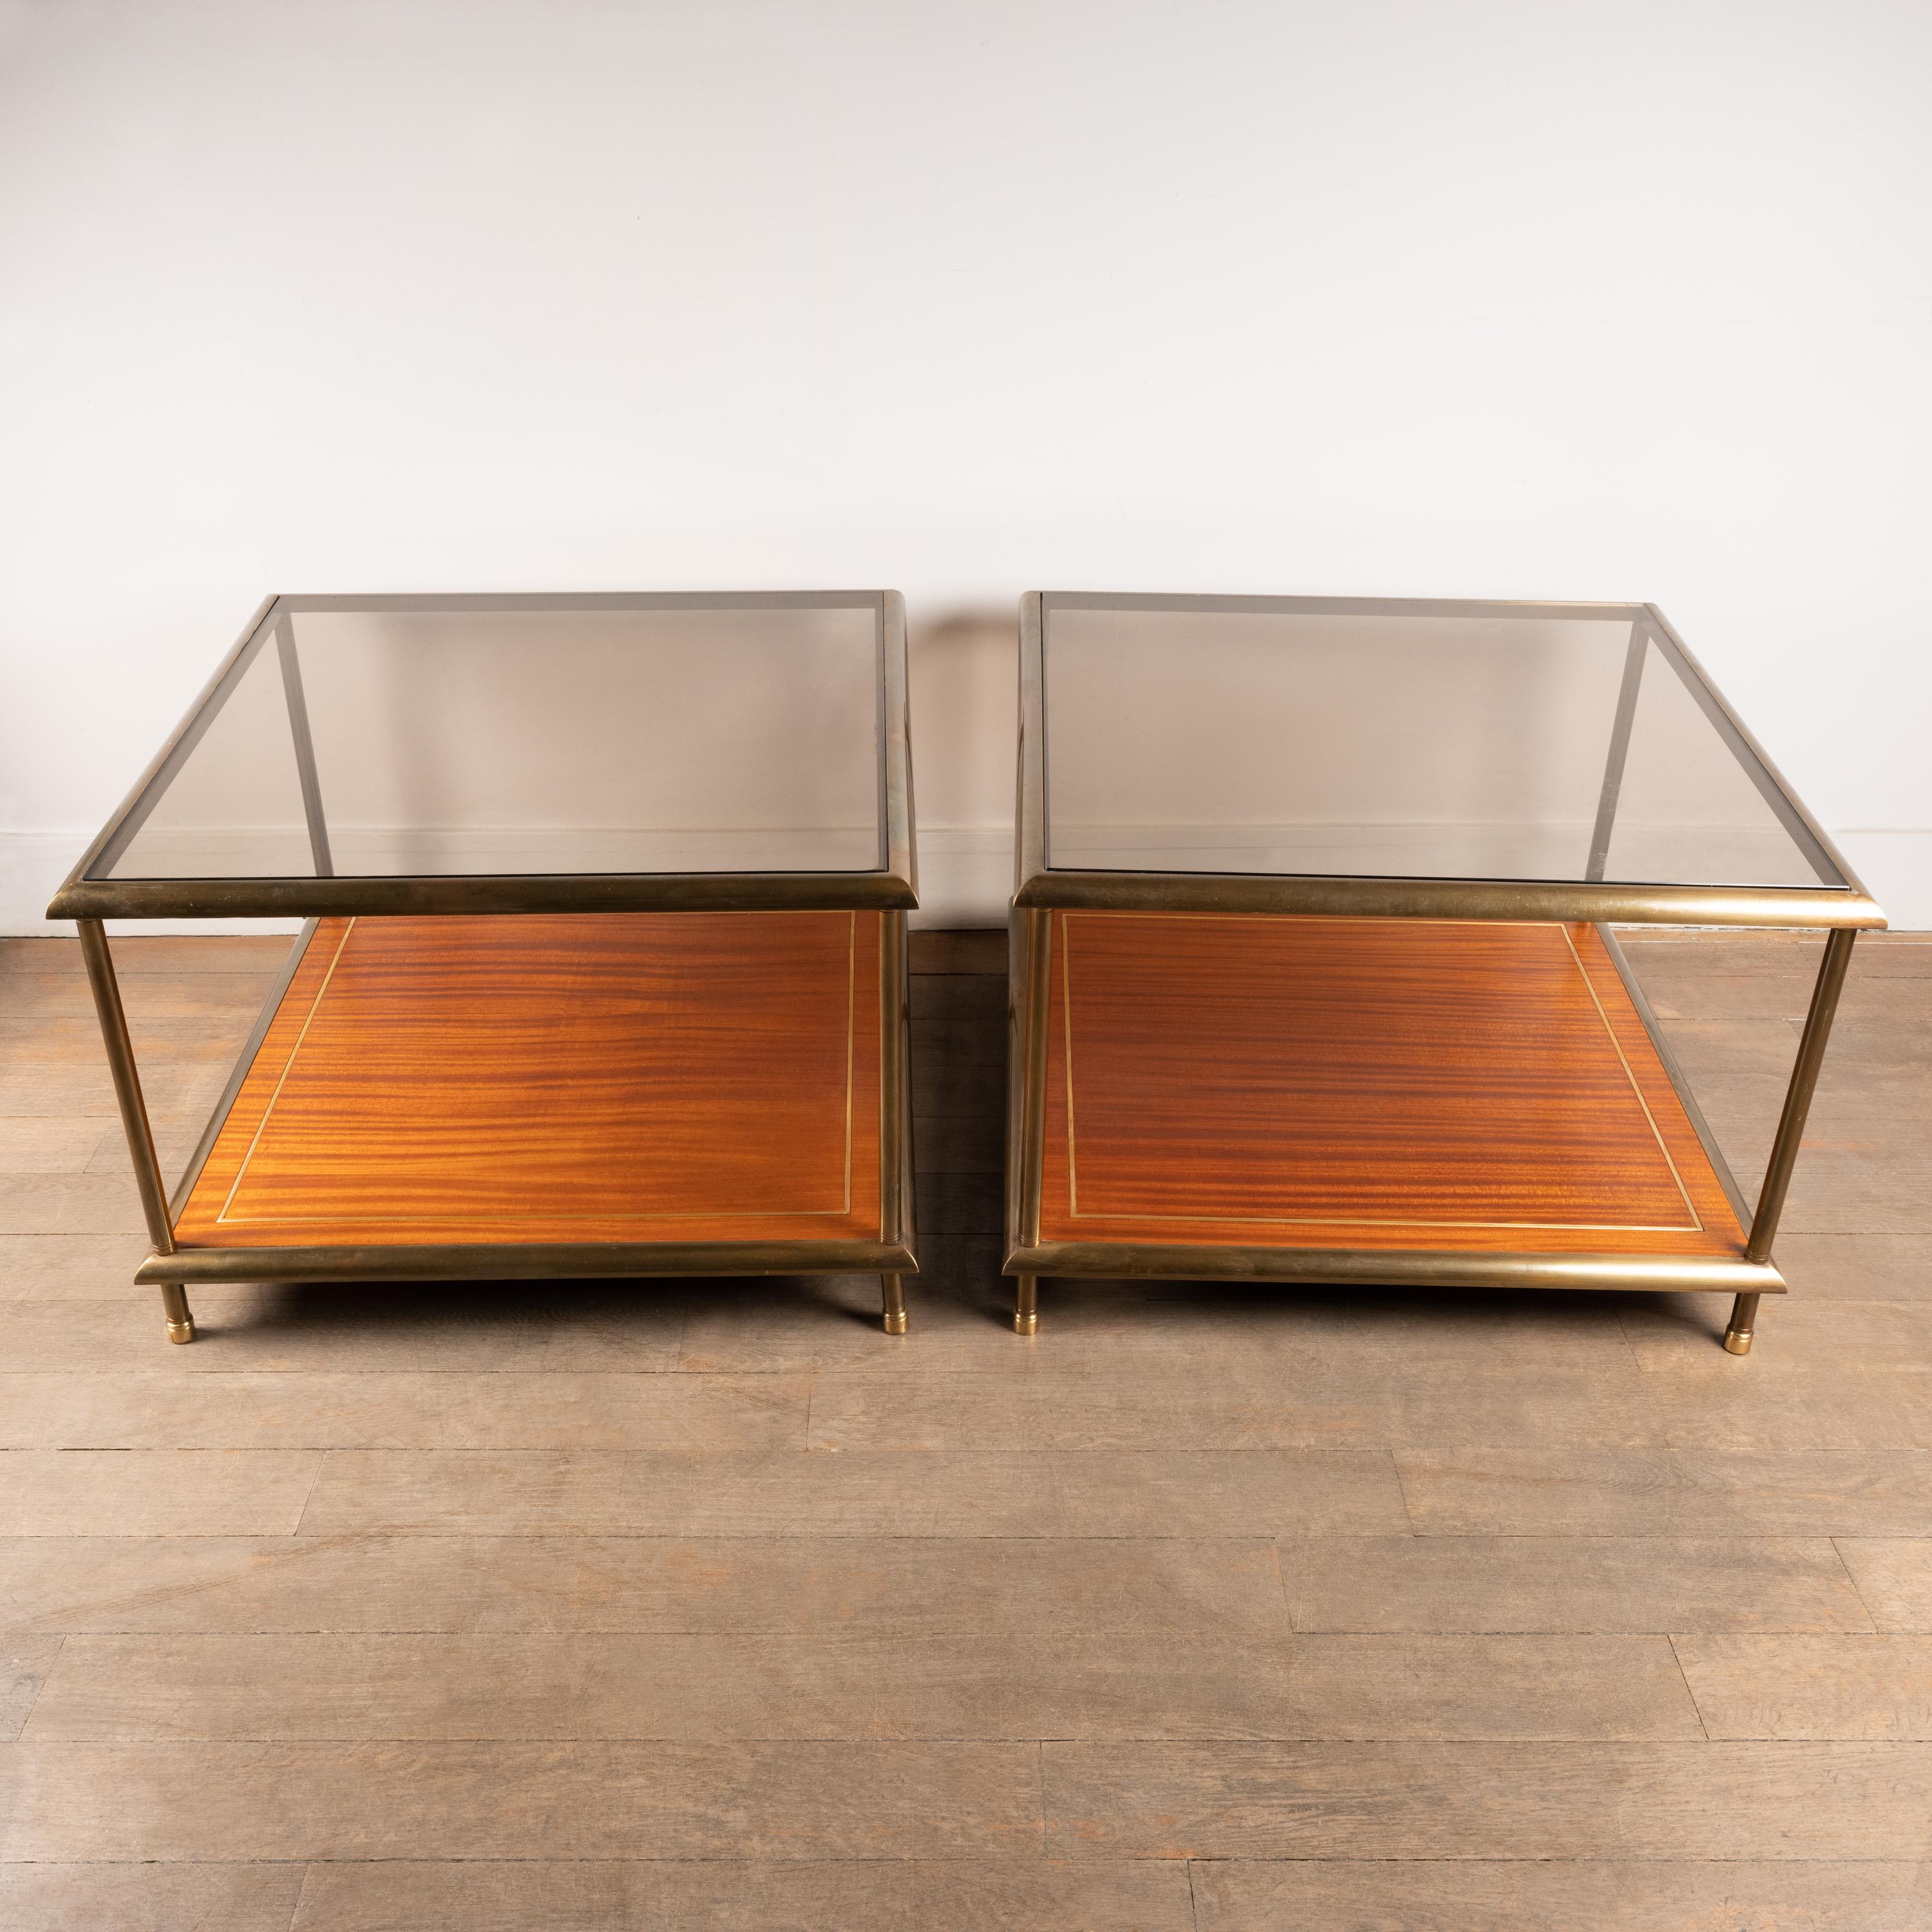 Pair of square side tables composed of two trays.
The top tray is made of glass and the bottom tray of
mahogany.
Structure in brass.
France, 1960s

Dimension :
Height : 49 cm / 19,29 inch
Width / depth : 70 cm / 27,55 inch.